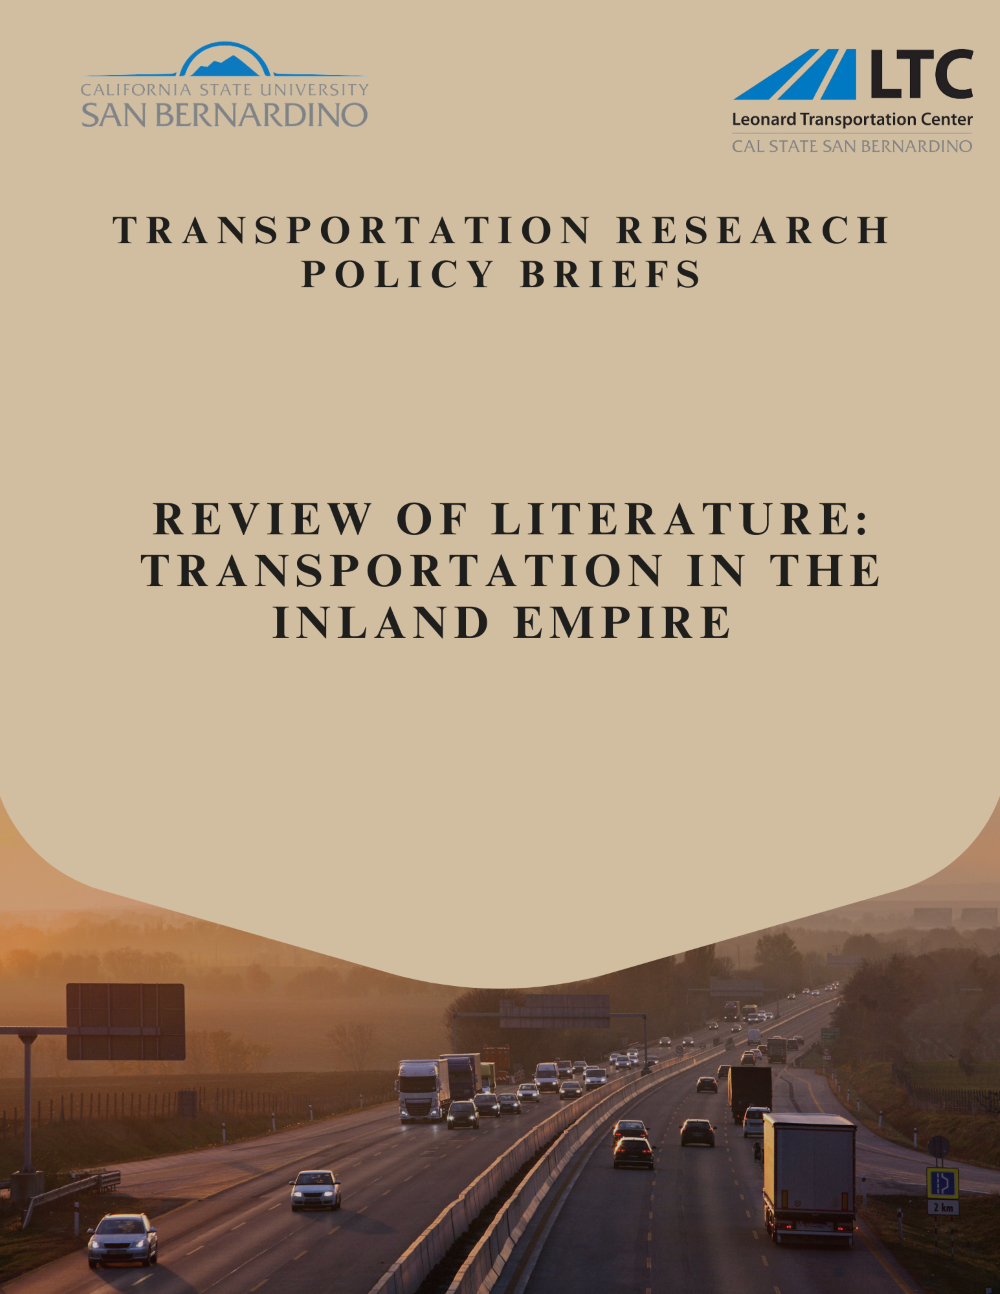 review of literature: tRANSPORTATION IN THE INLAND EMPIRE